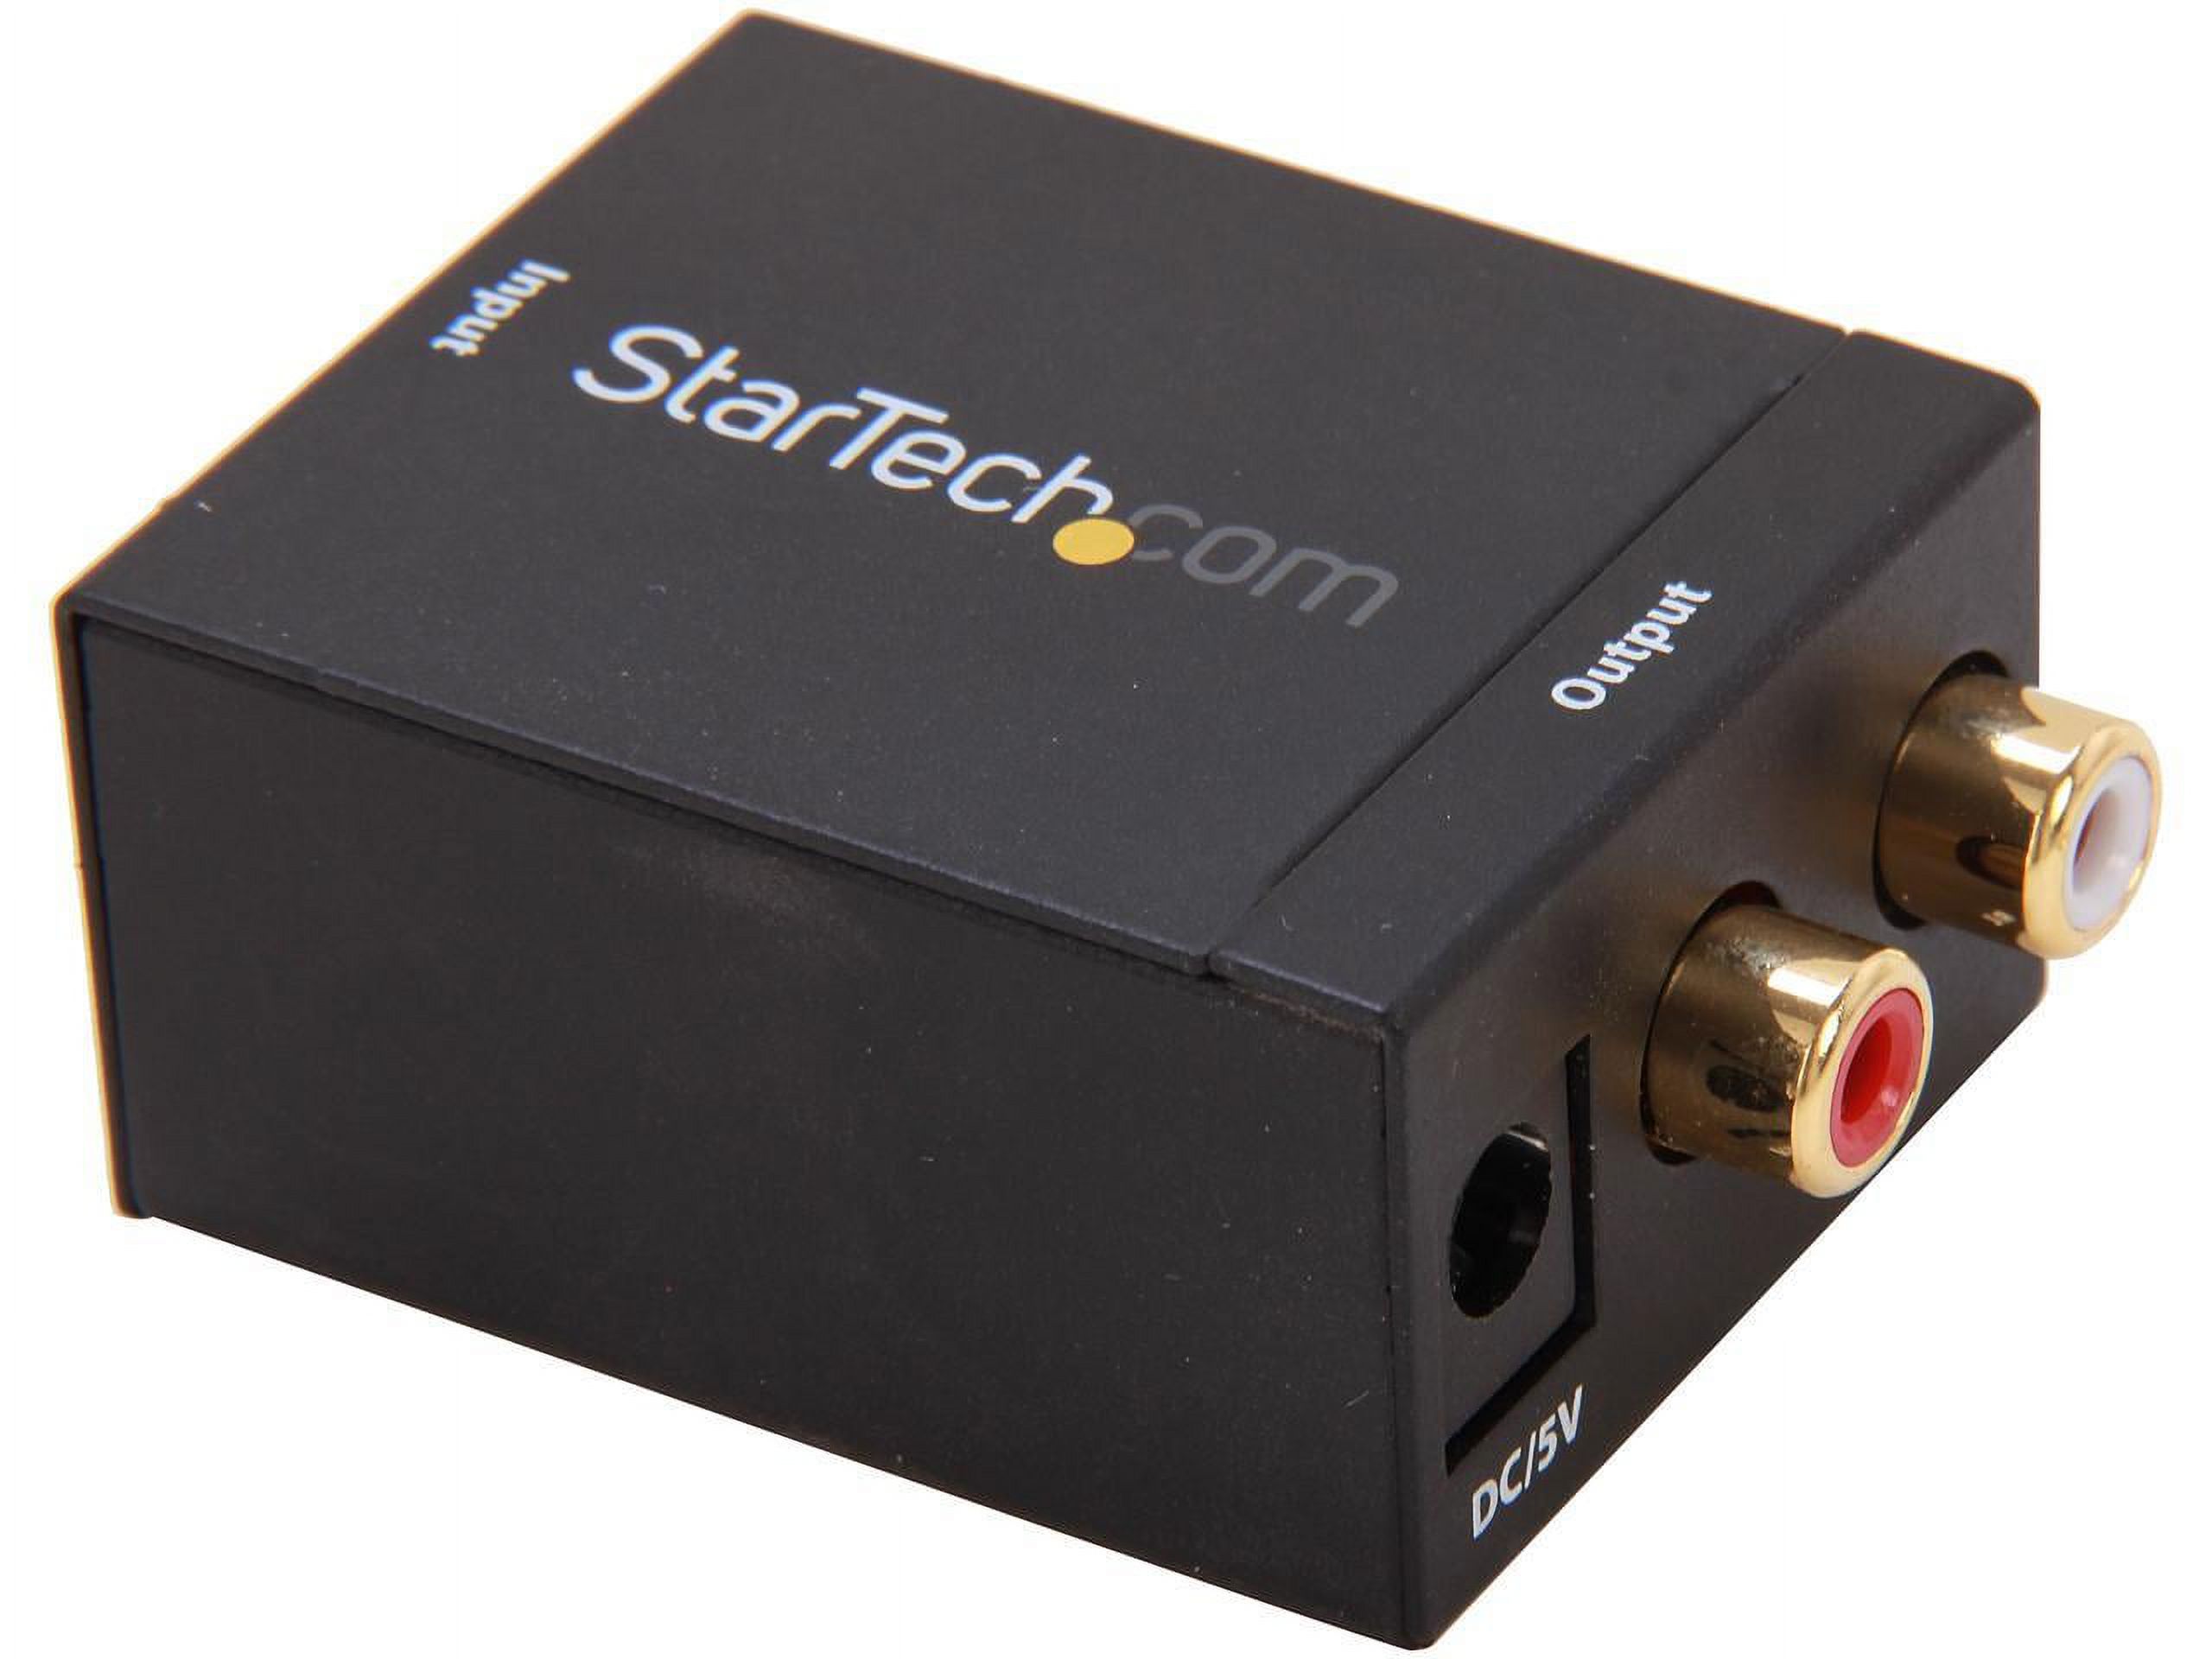 StarTech.com SPDIF2AA SPDIF Digital Coaxial or Toslink to Stereo RCA Audio Converter - image 1 of 5